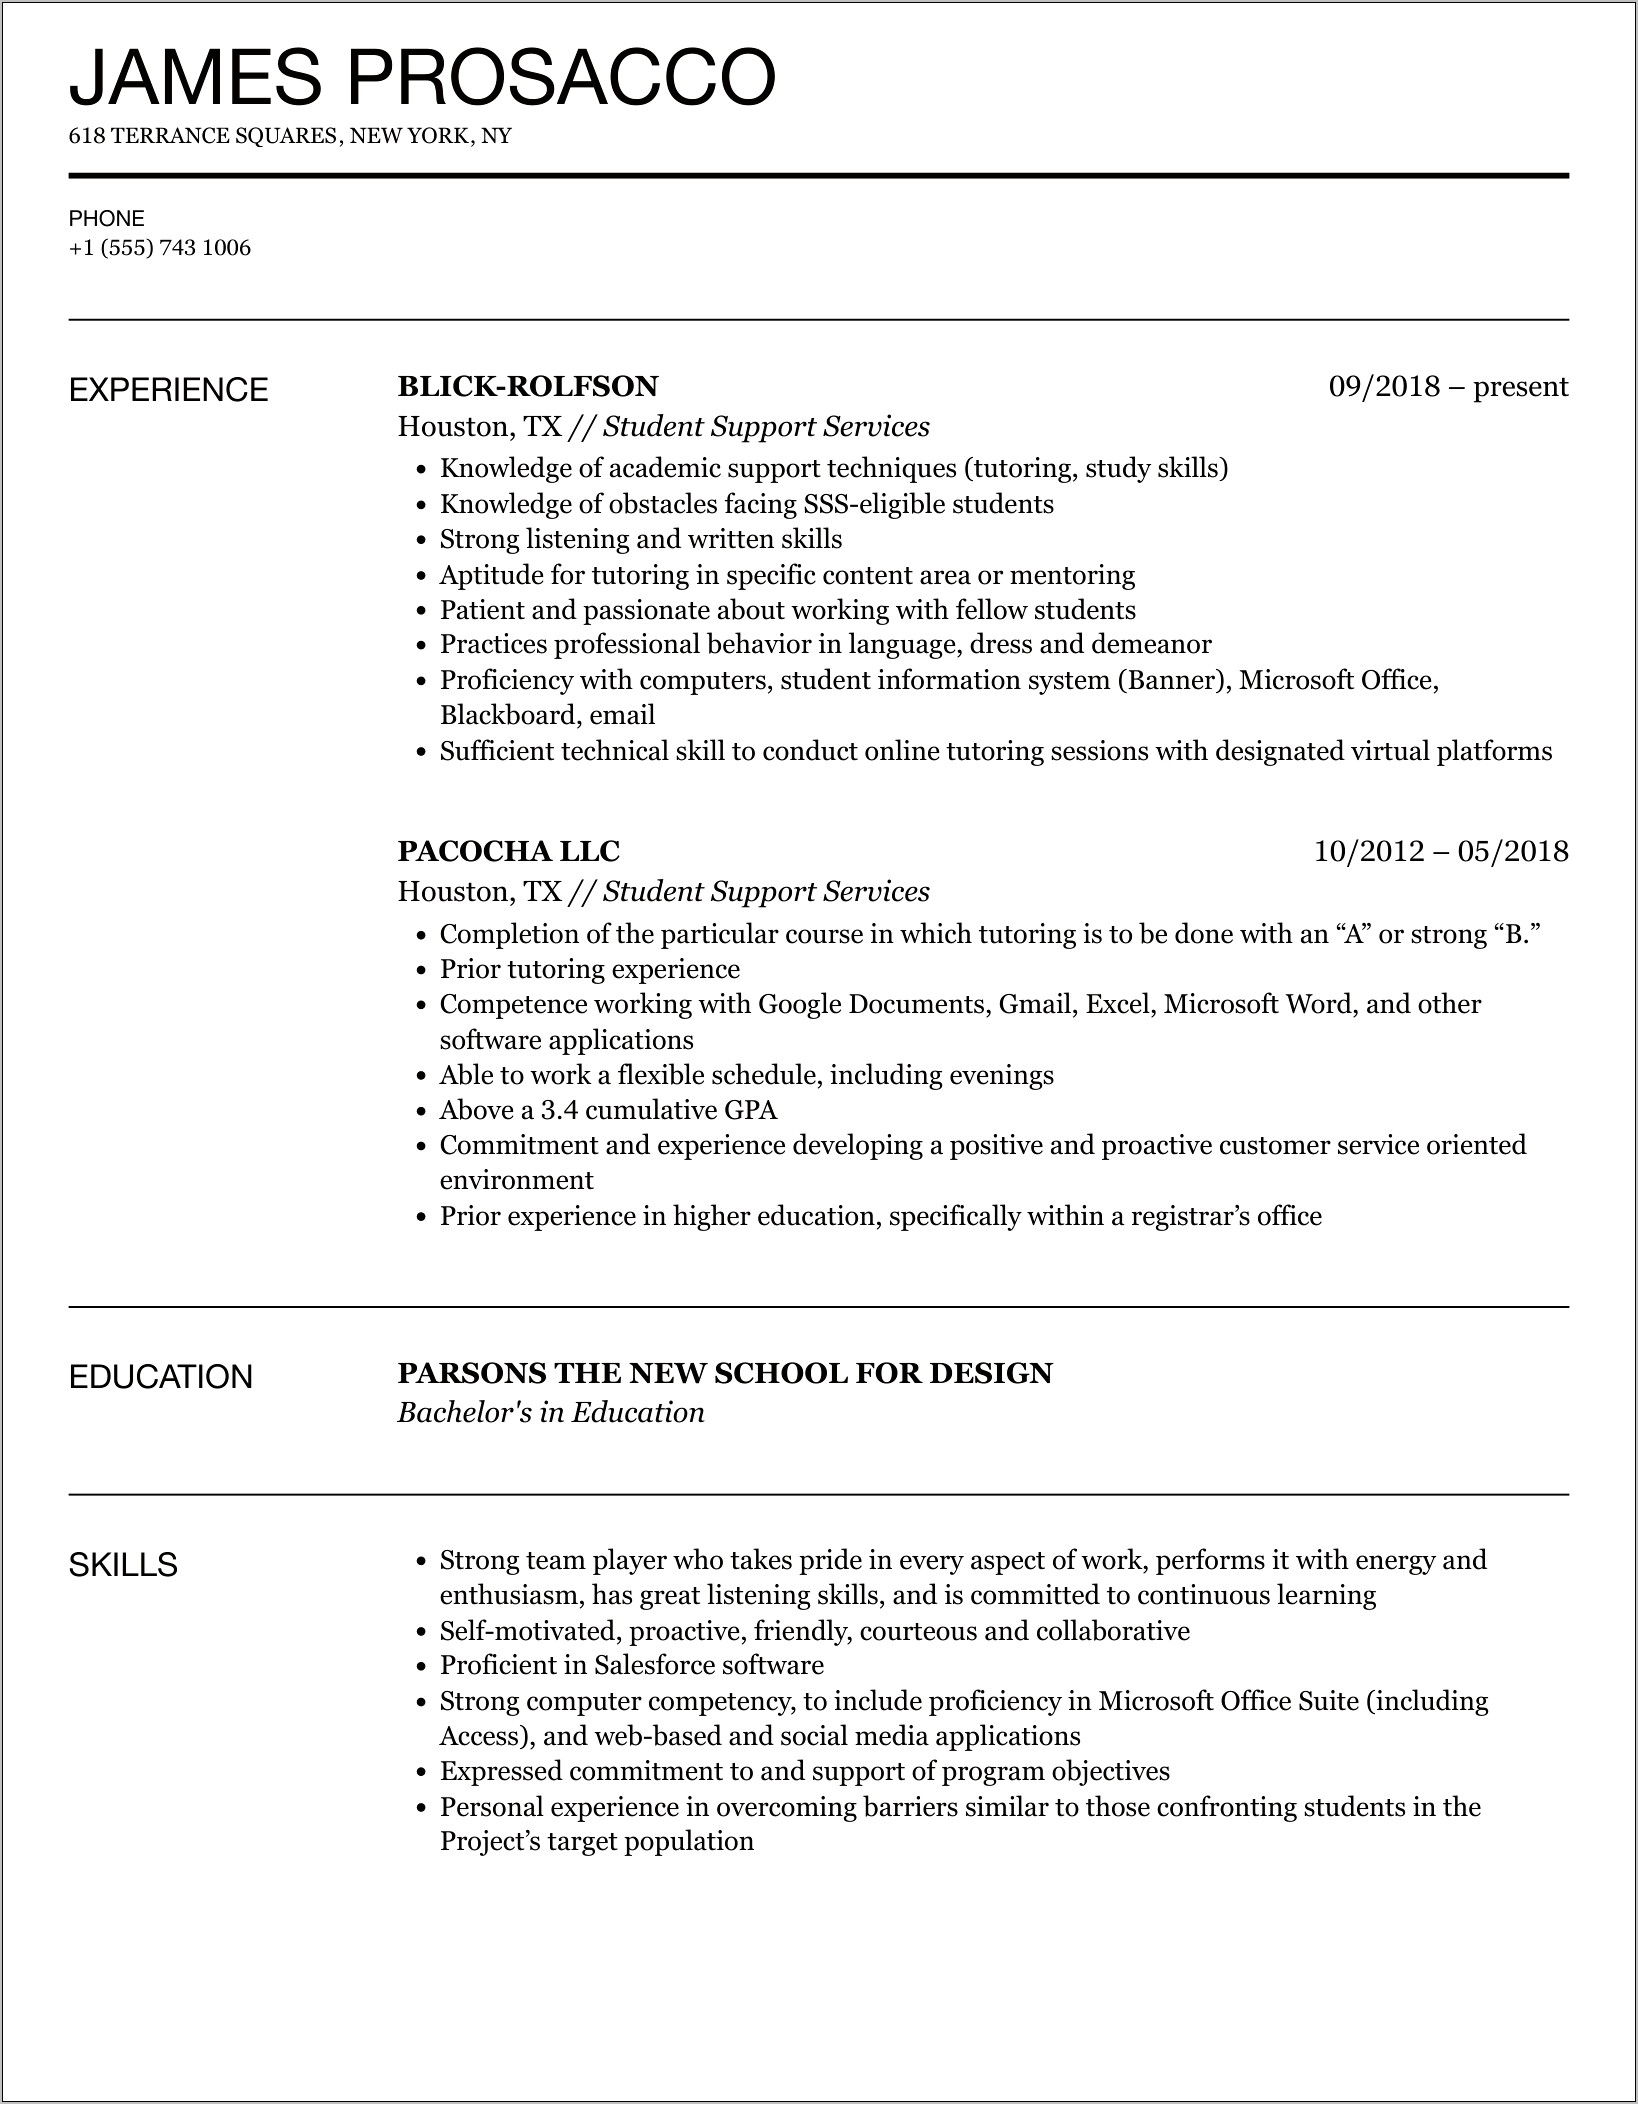 Resume Objective For Student Services